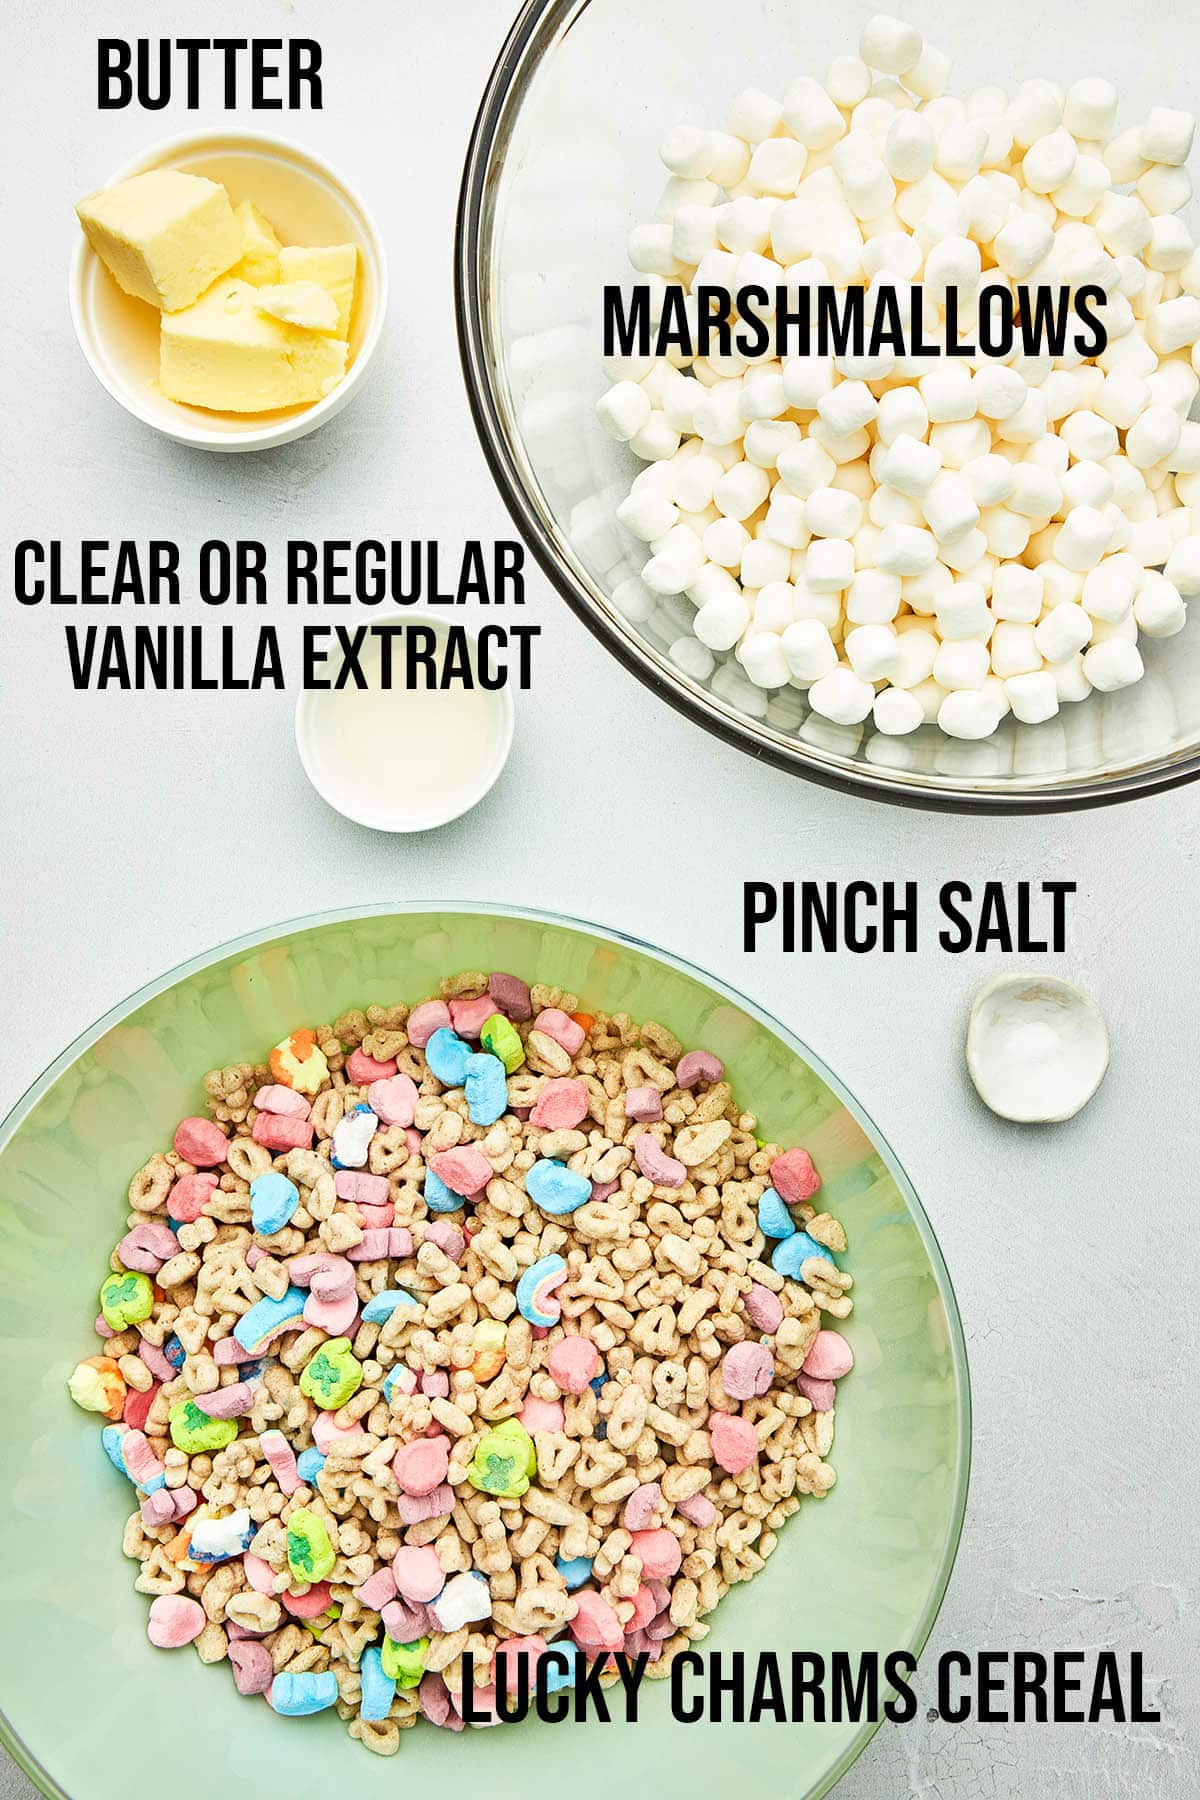 Lucky charms treats ingredients with labels.